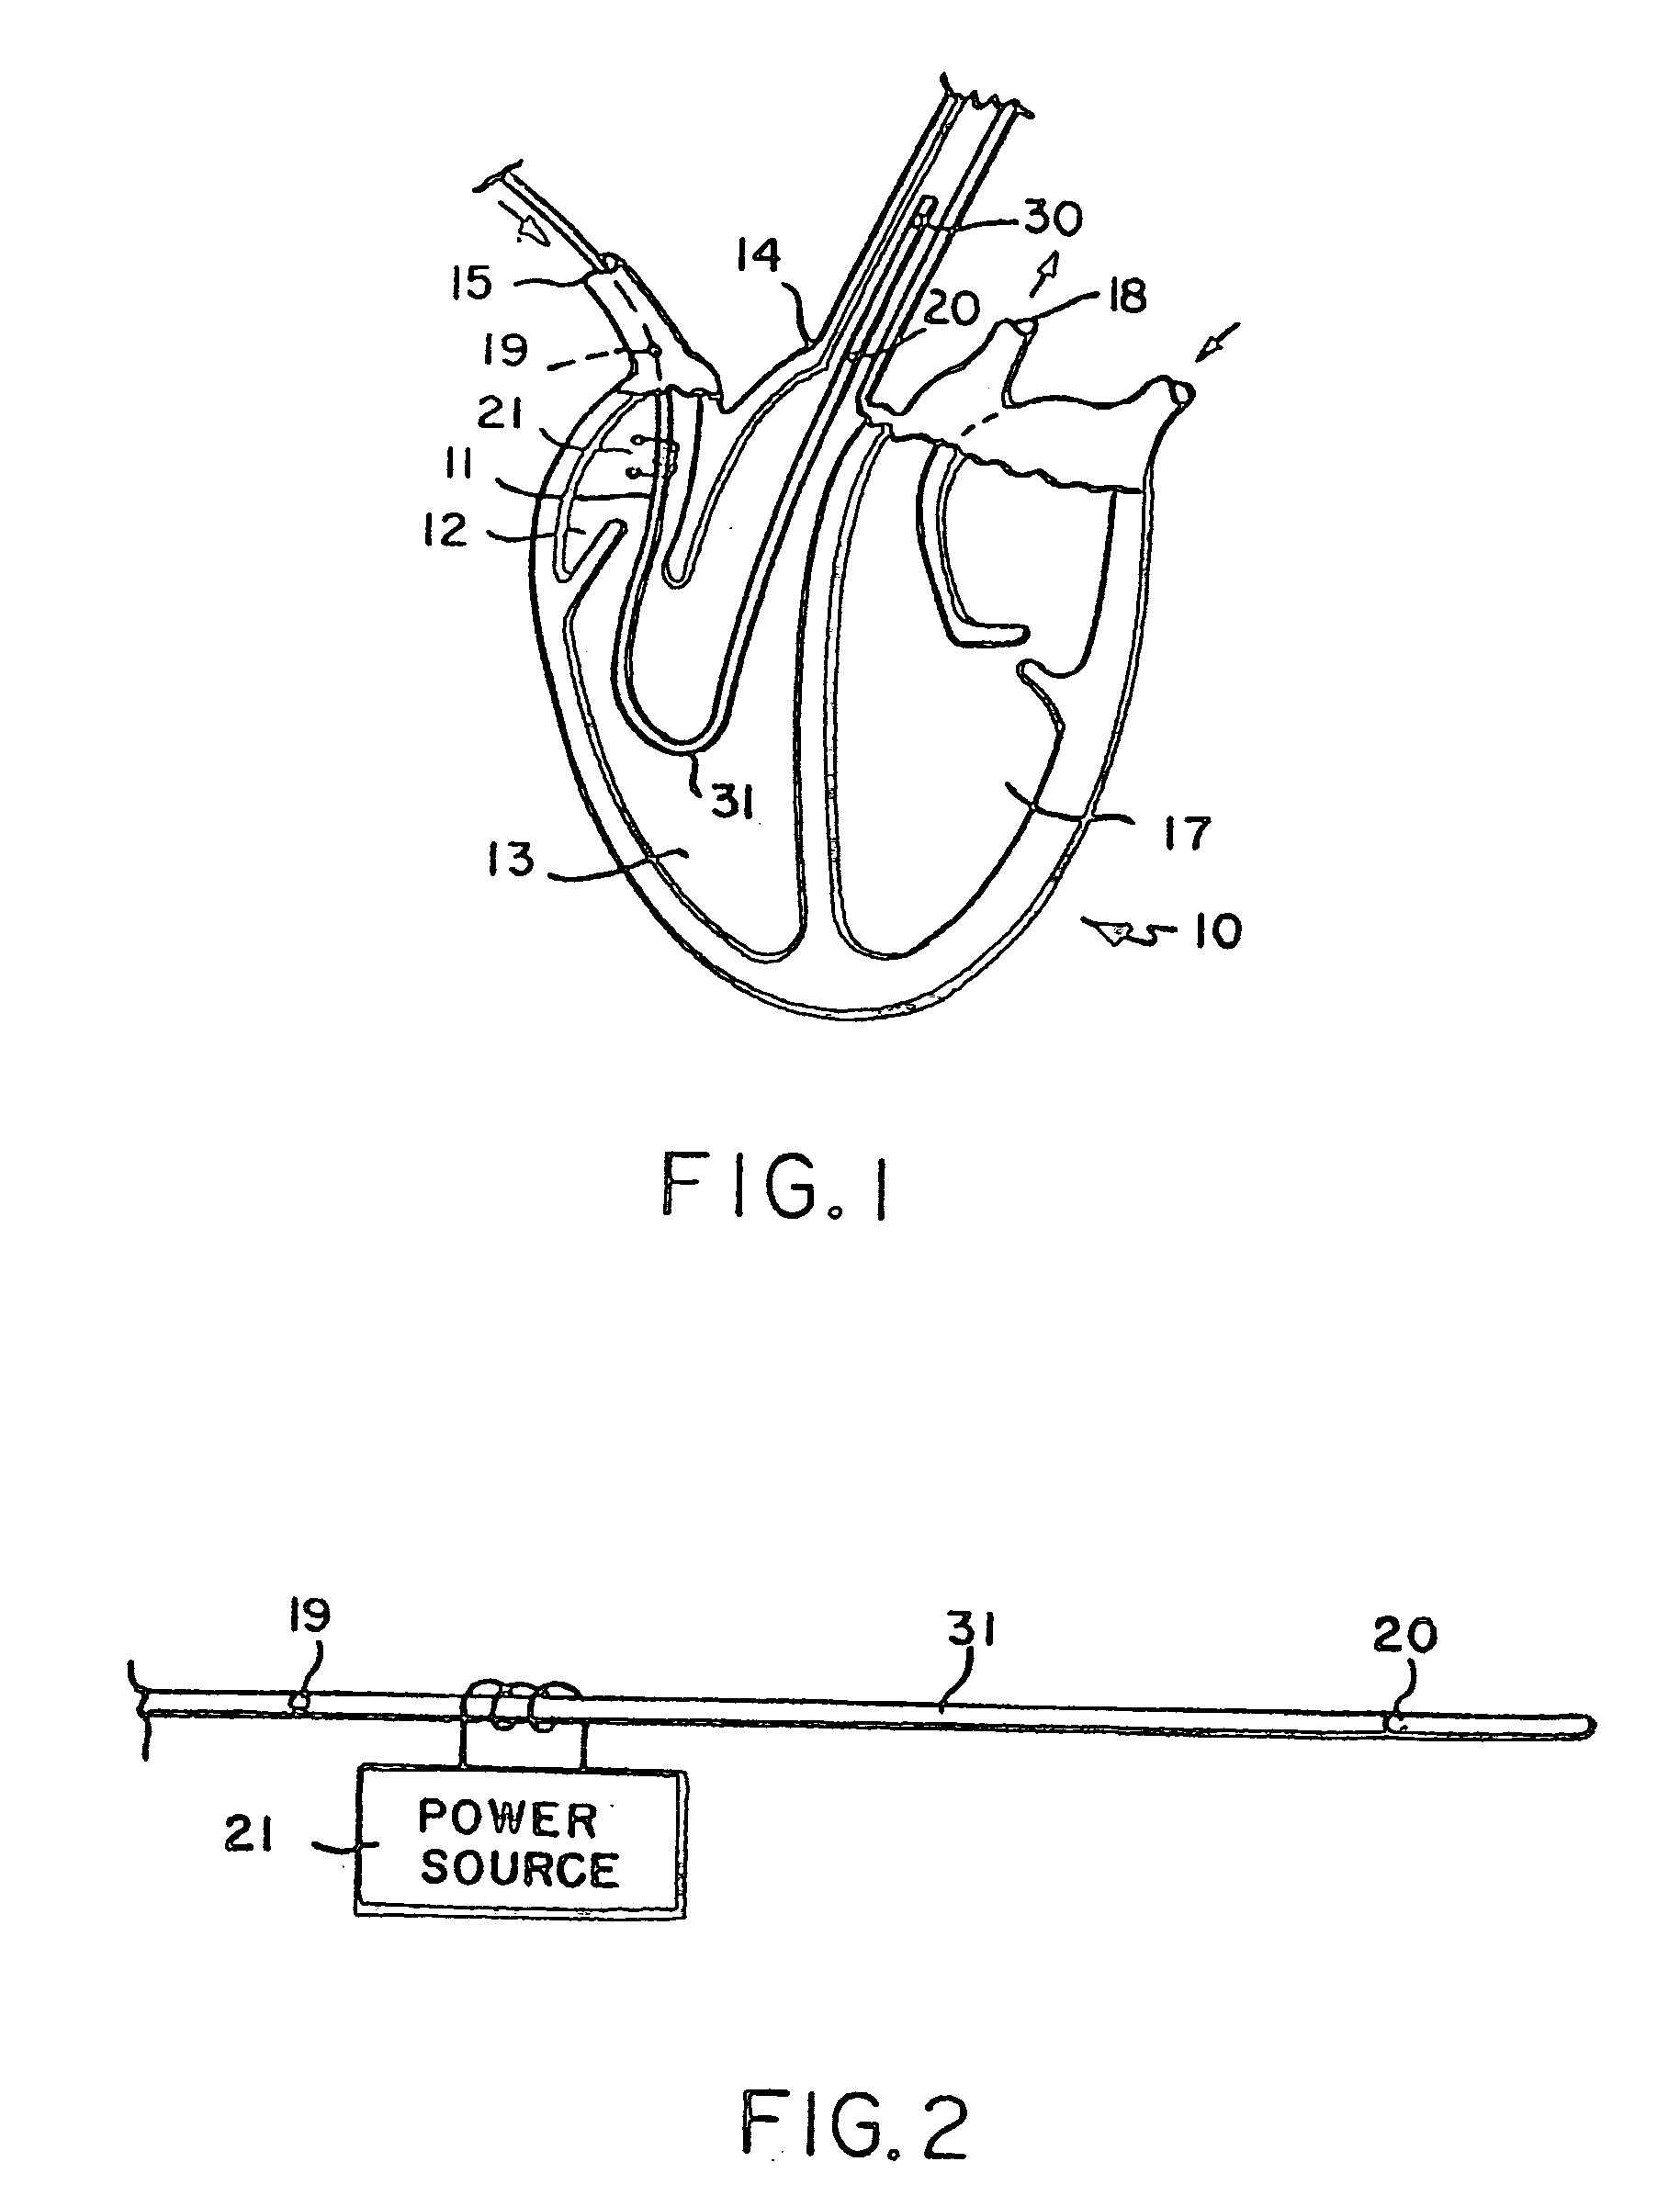 Blood flow monitor with venous and arterial sensors